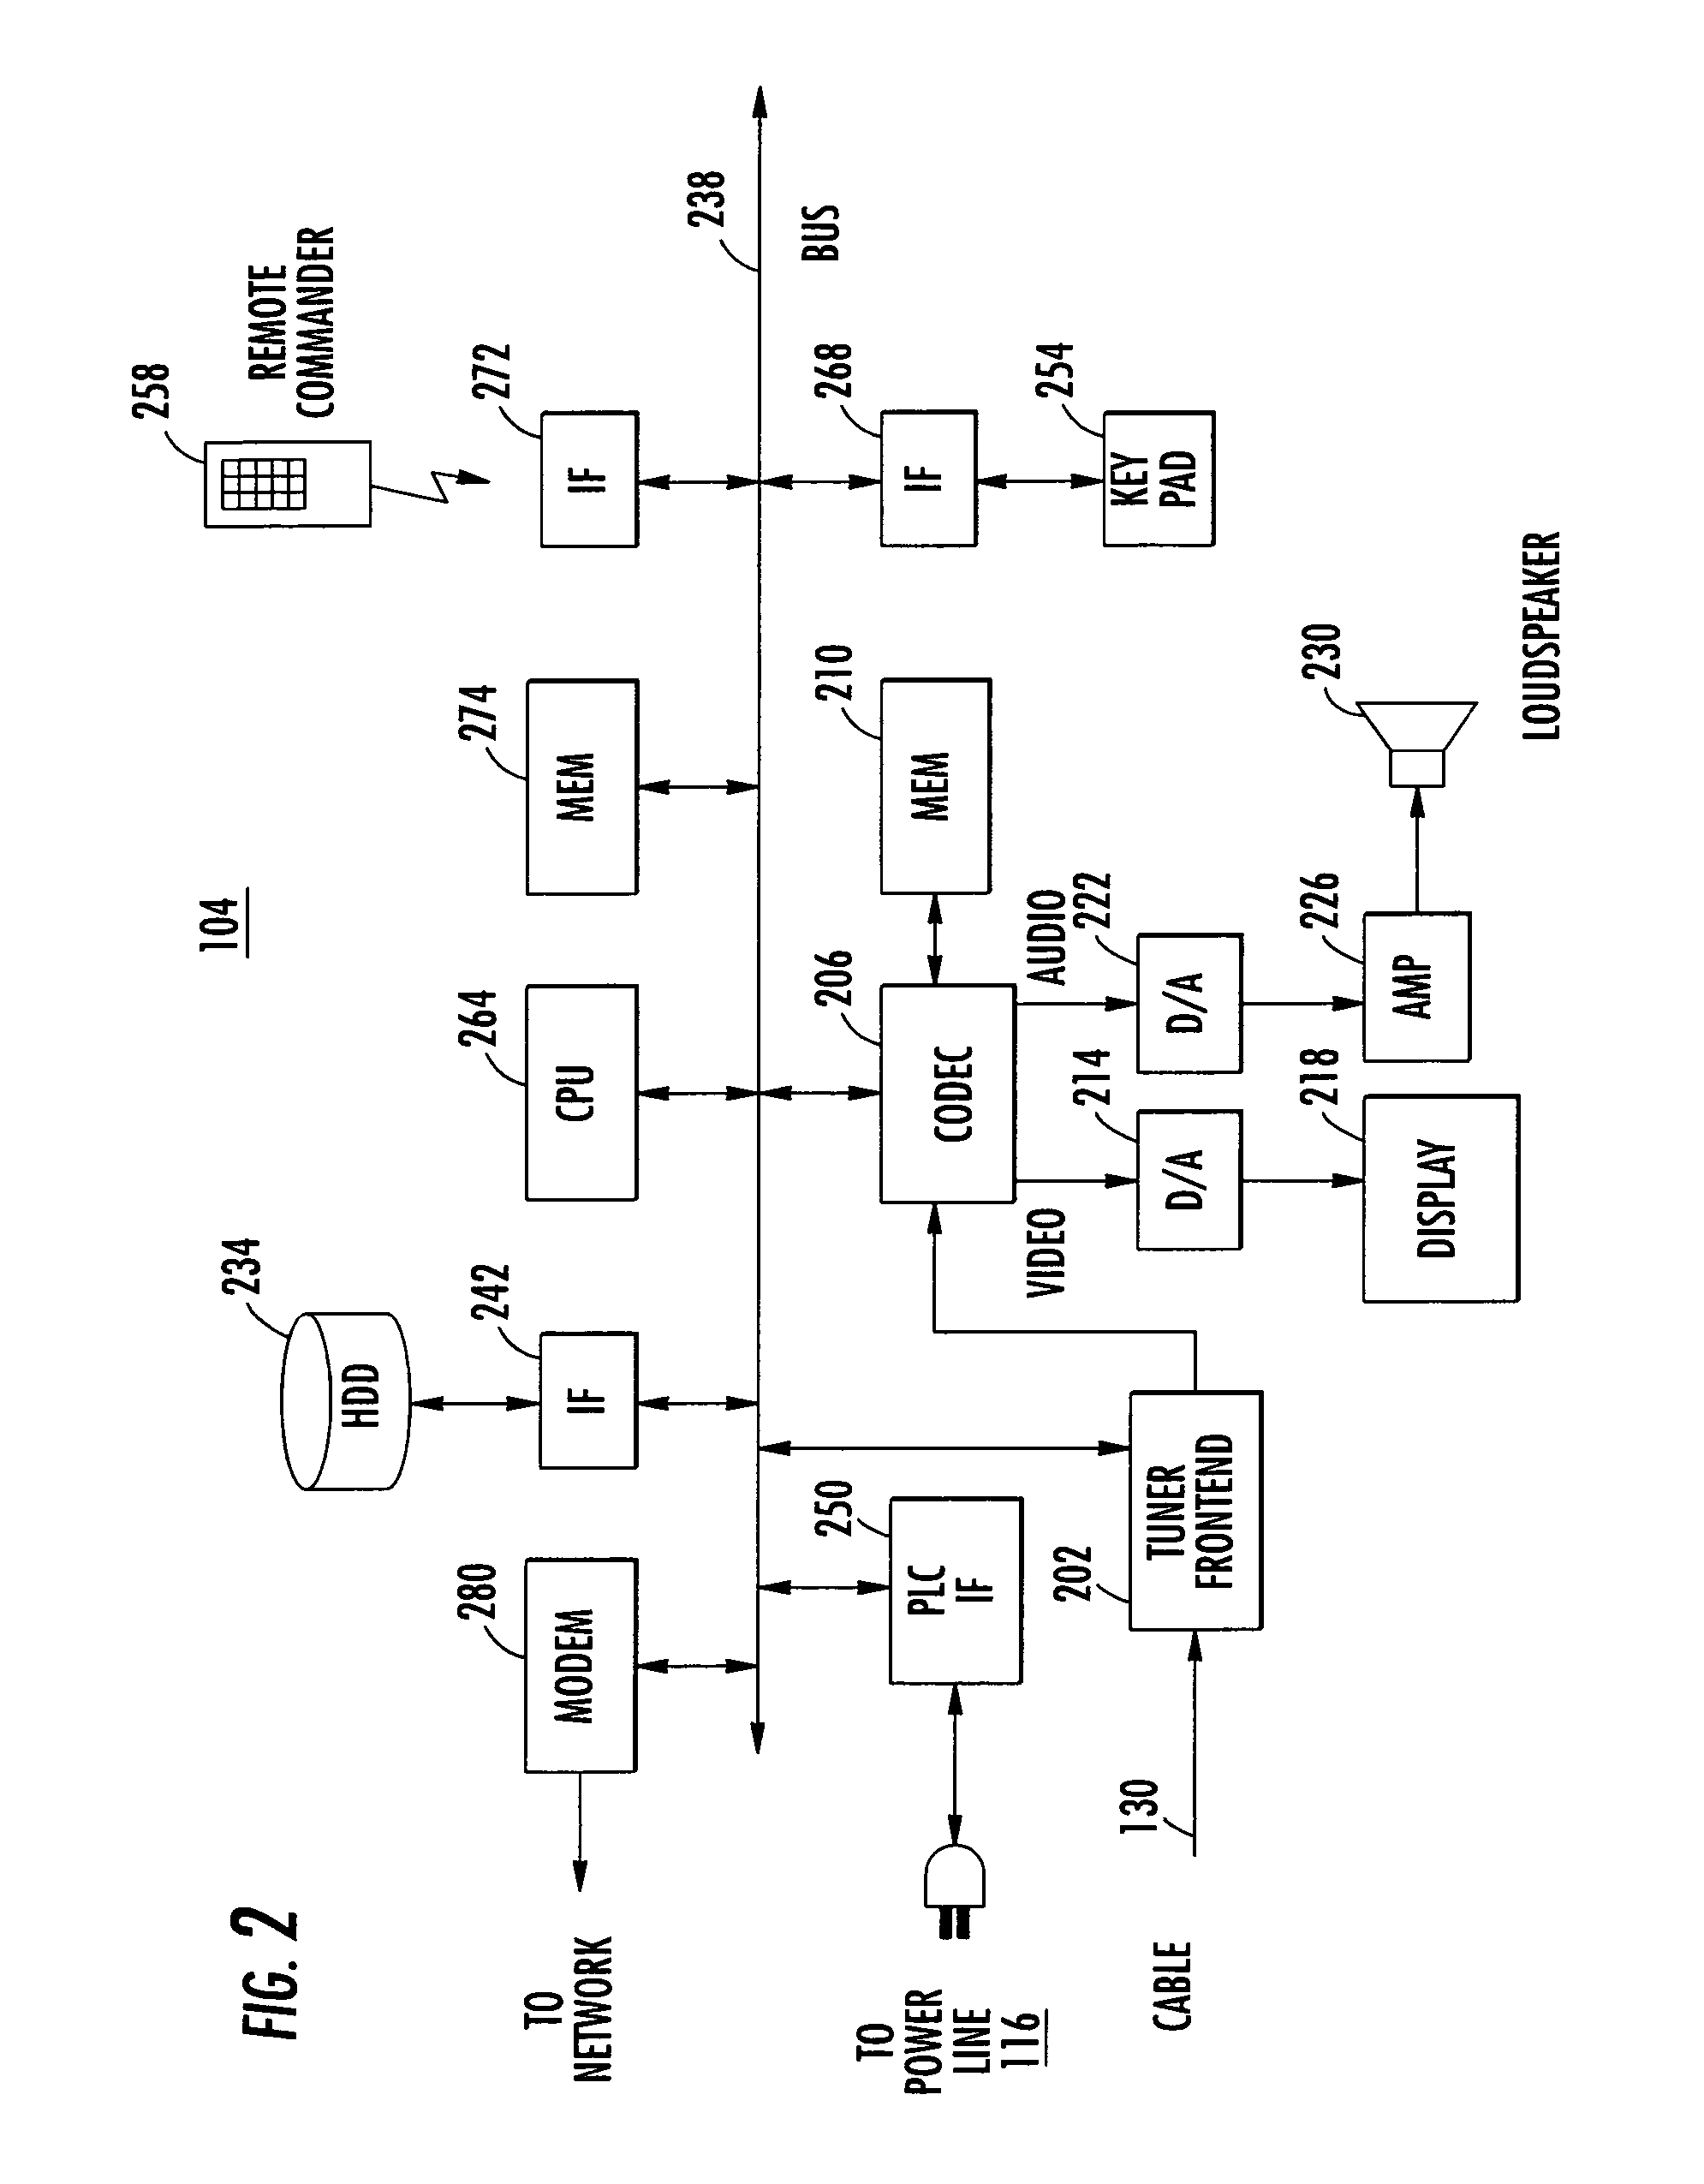 Time slot and carrier frequency allocation in a network